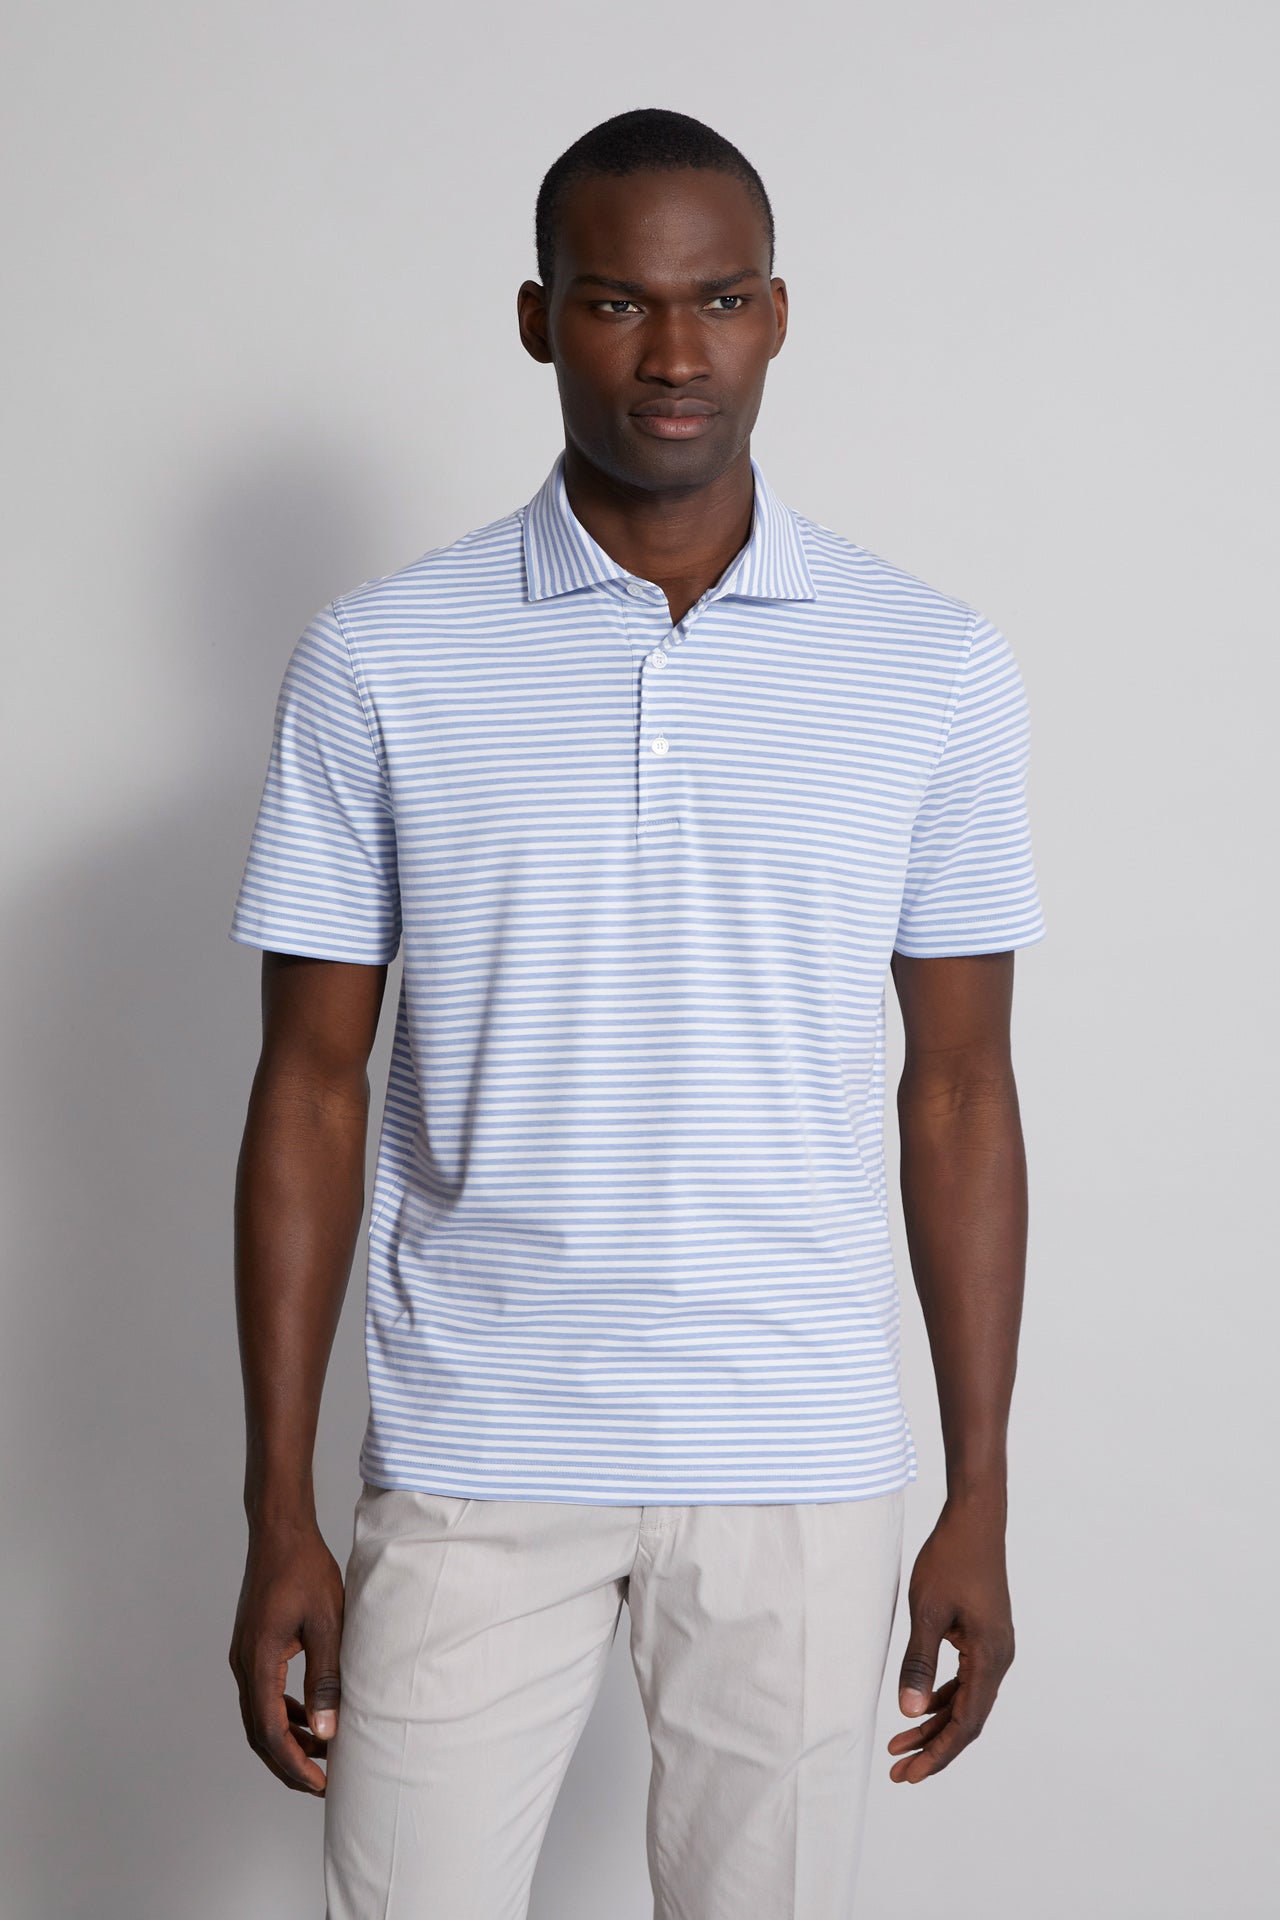 men's striped polo t-shirt blue and white